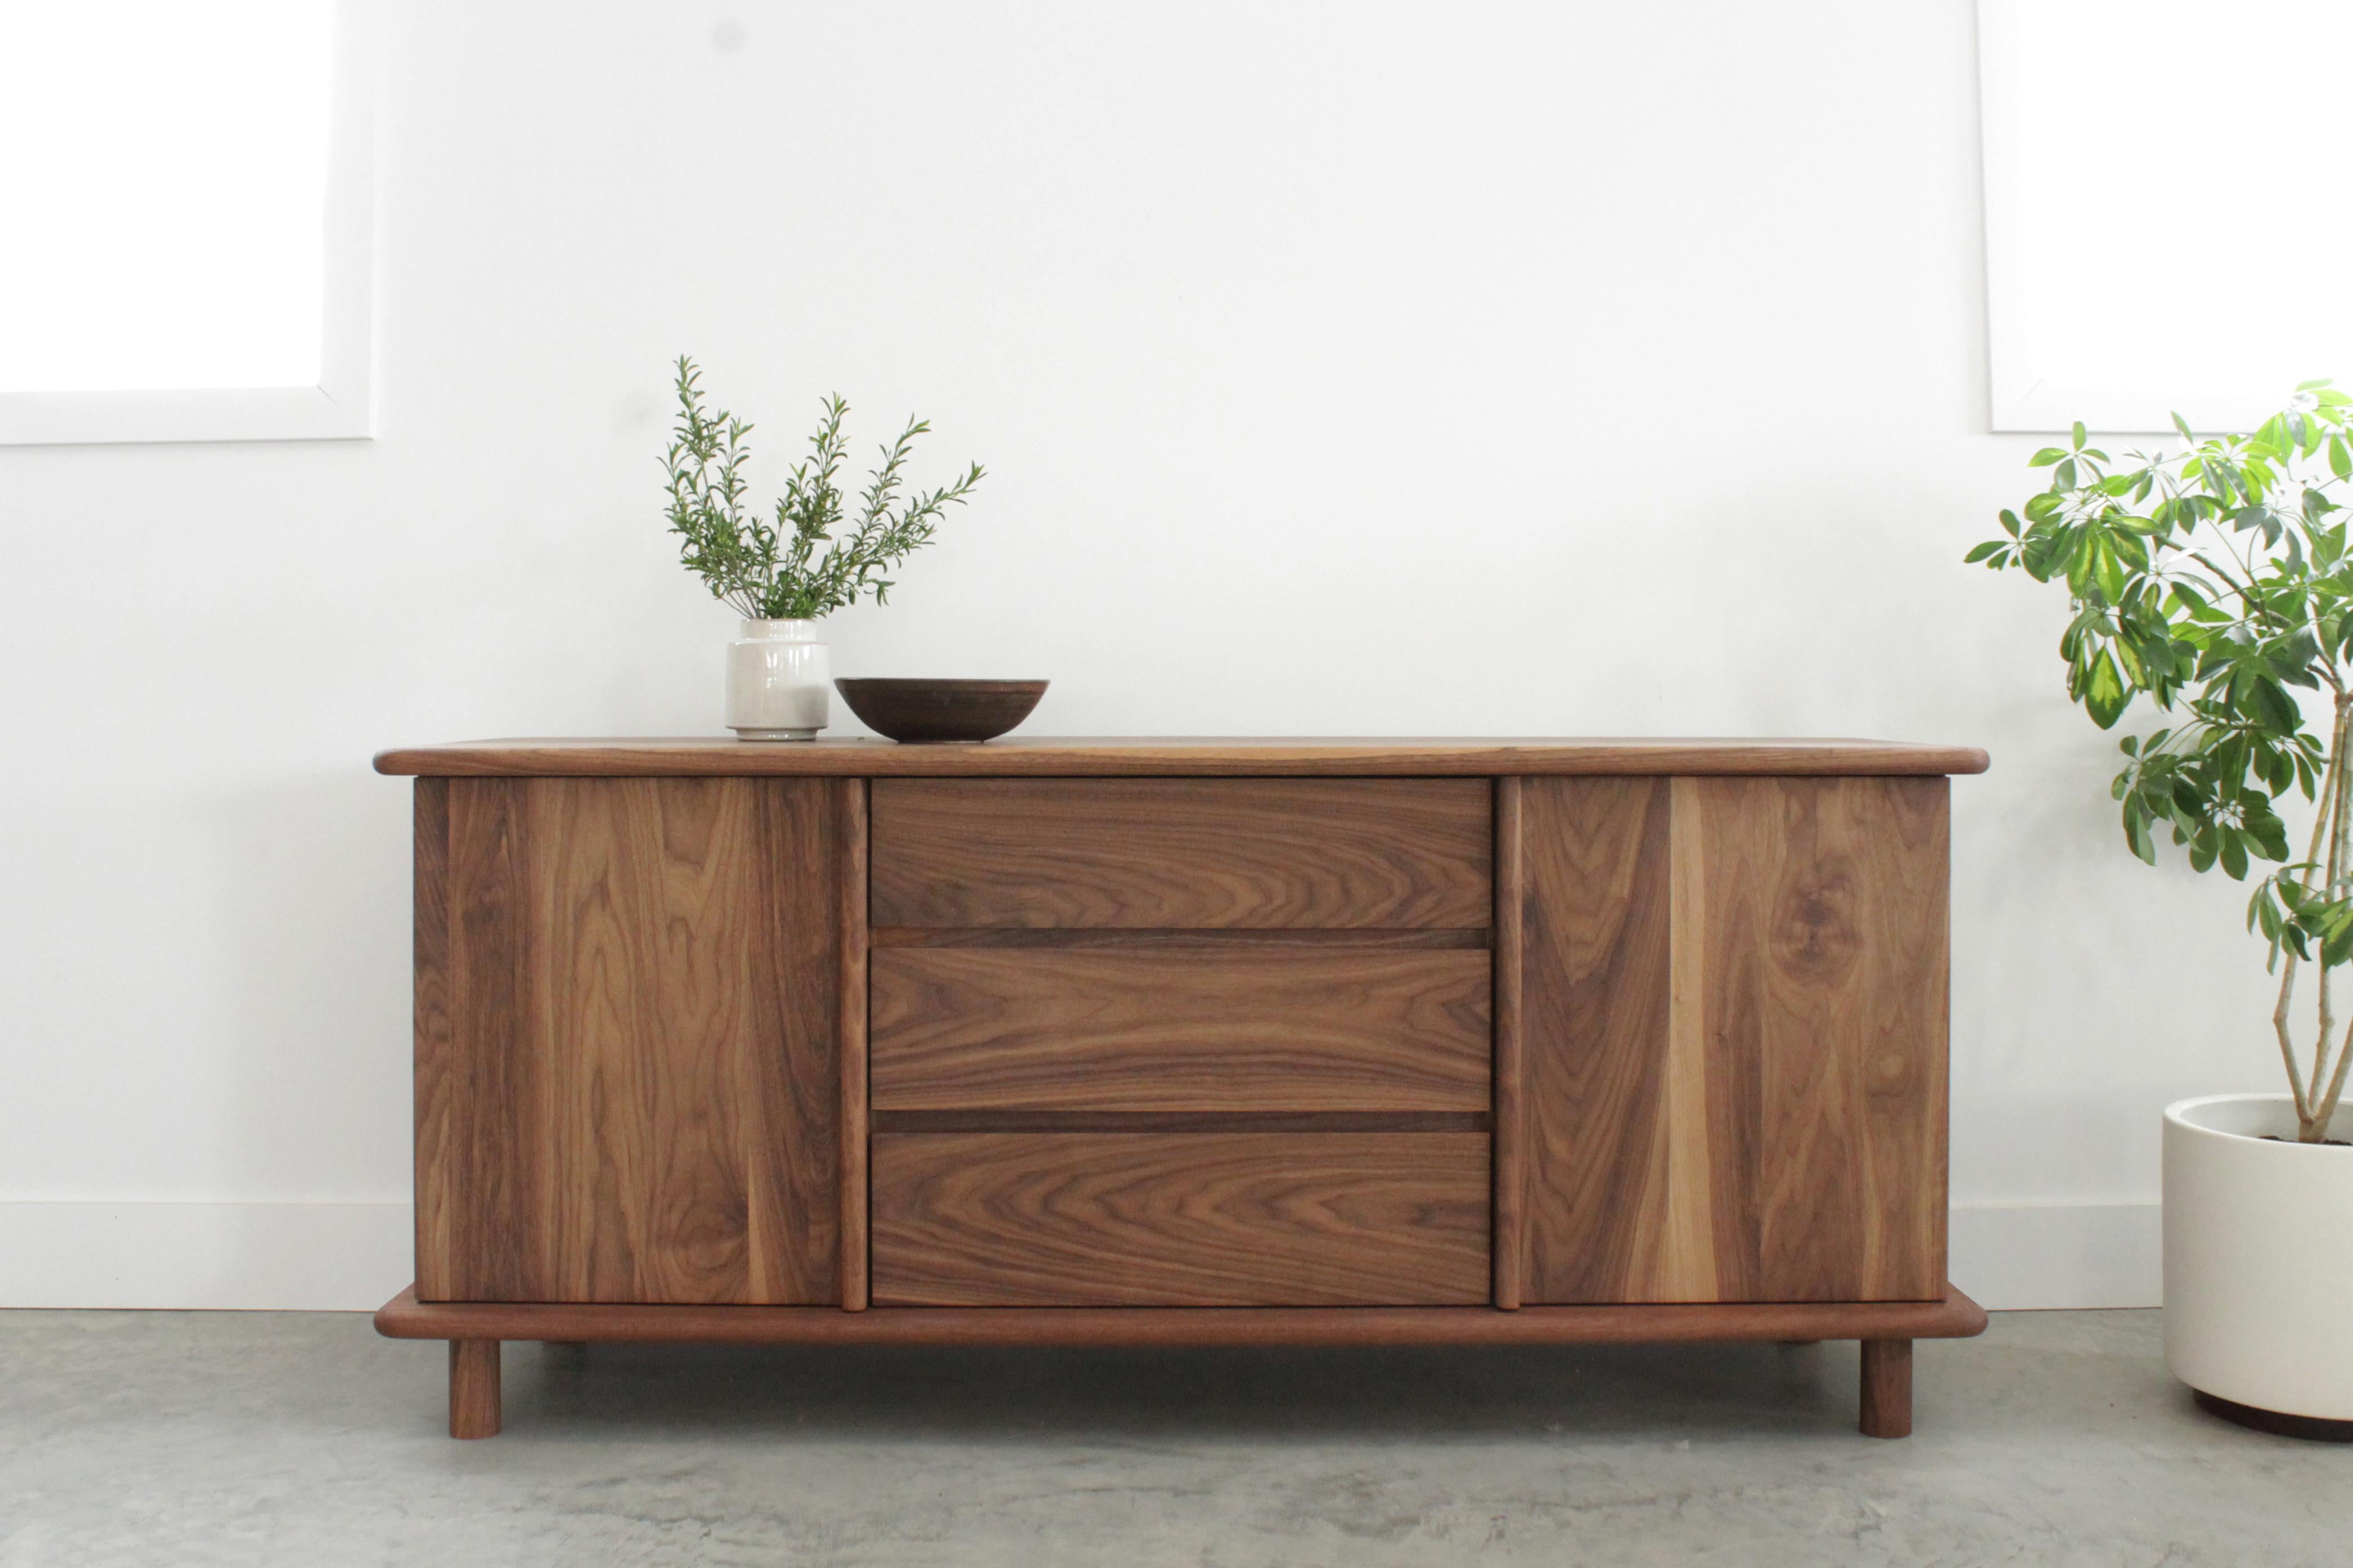 The Mora credenza is as functional as it is sculptural. Doors with robust vertical pulls conceal adjustable shelving and allow space for media storage or other items. Each surface boasts it’s own unique yet consistent graining and soft edges. Built